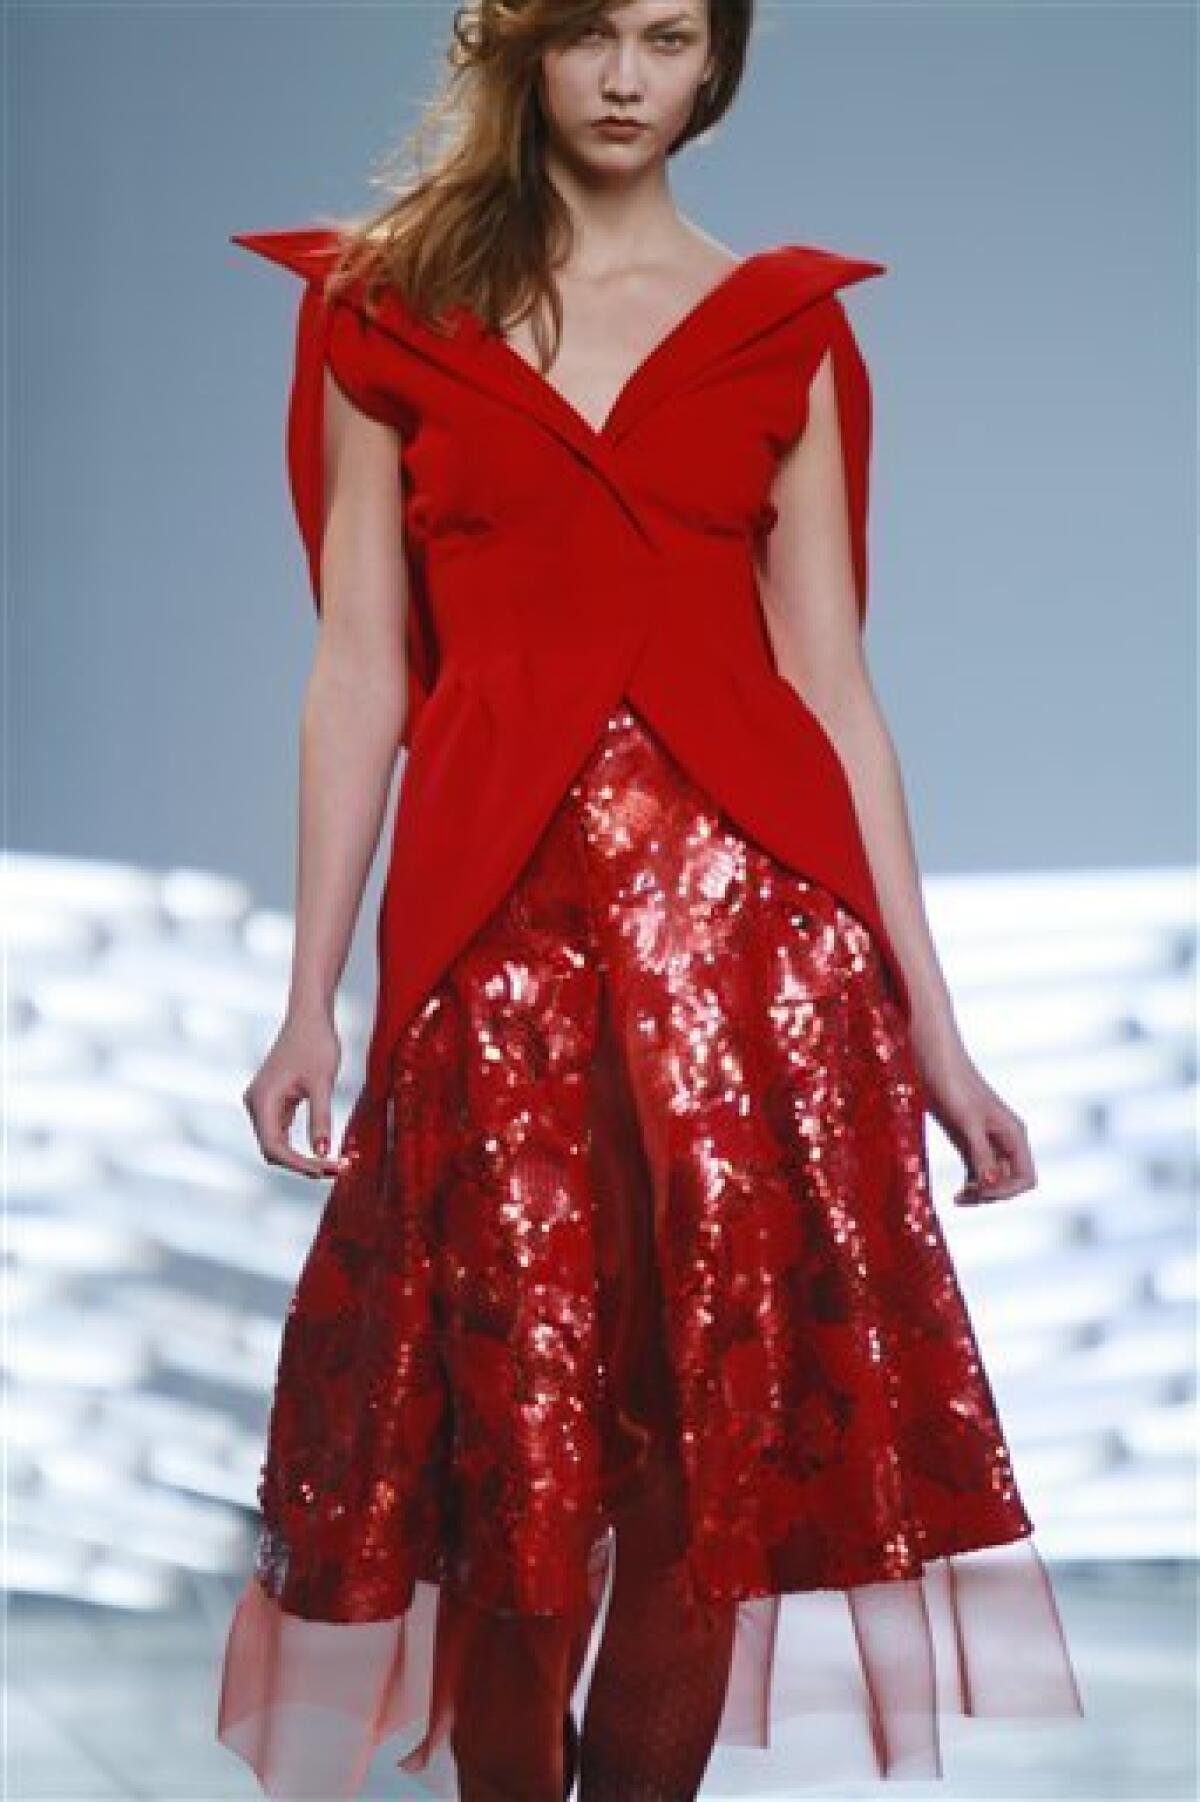 Fashion from the fall 2011 collection of Rodarte is modeled on Tuesday, Feb. 15, 2011 in New York. (AP Photo/Bebeto Matthews)